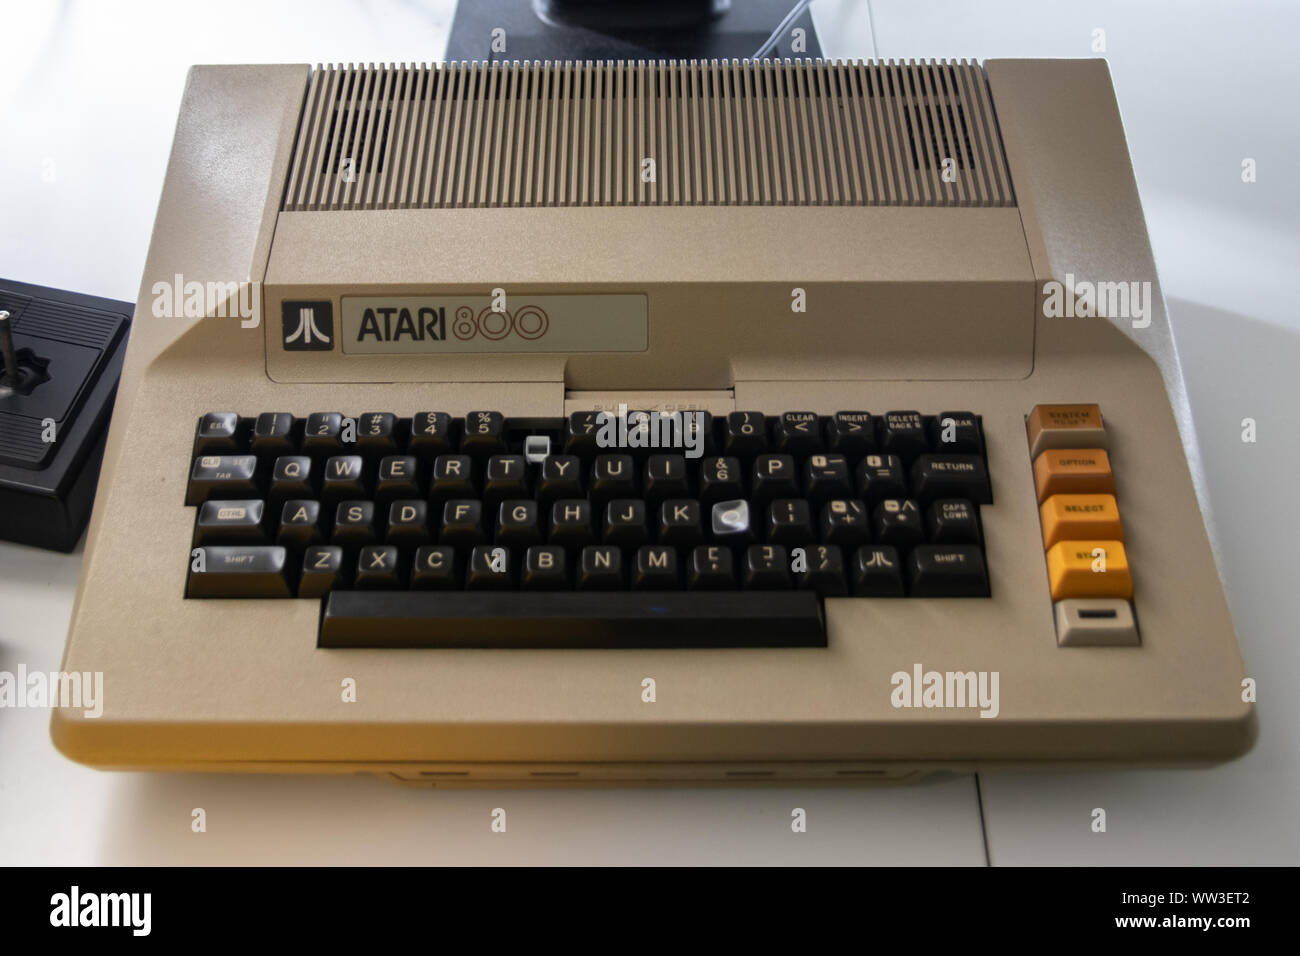 an Atari 800 home computer made by Atari from 1979 to 1992 a vintage personal computer Stock Photo